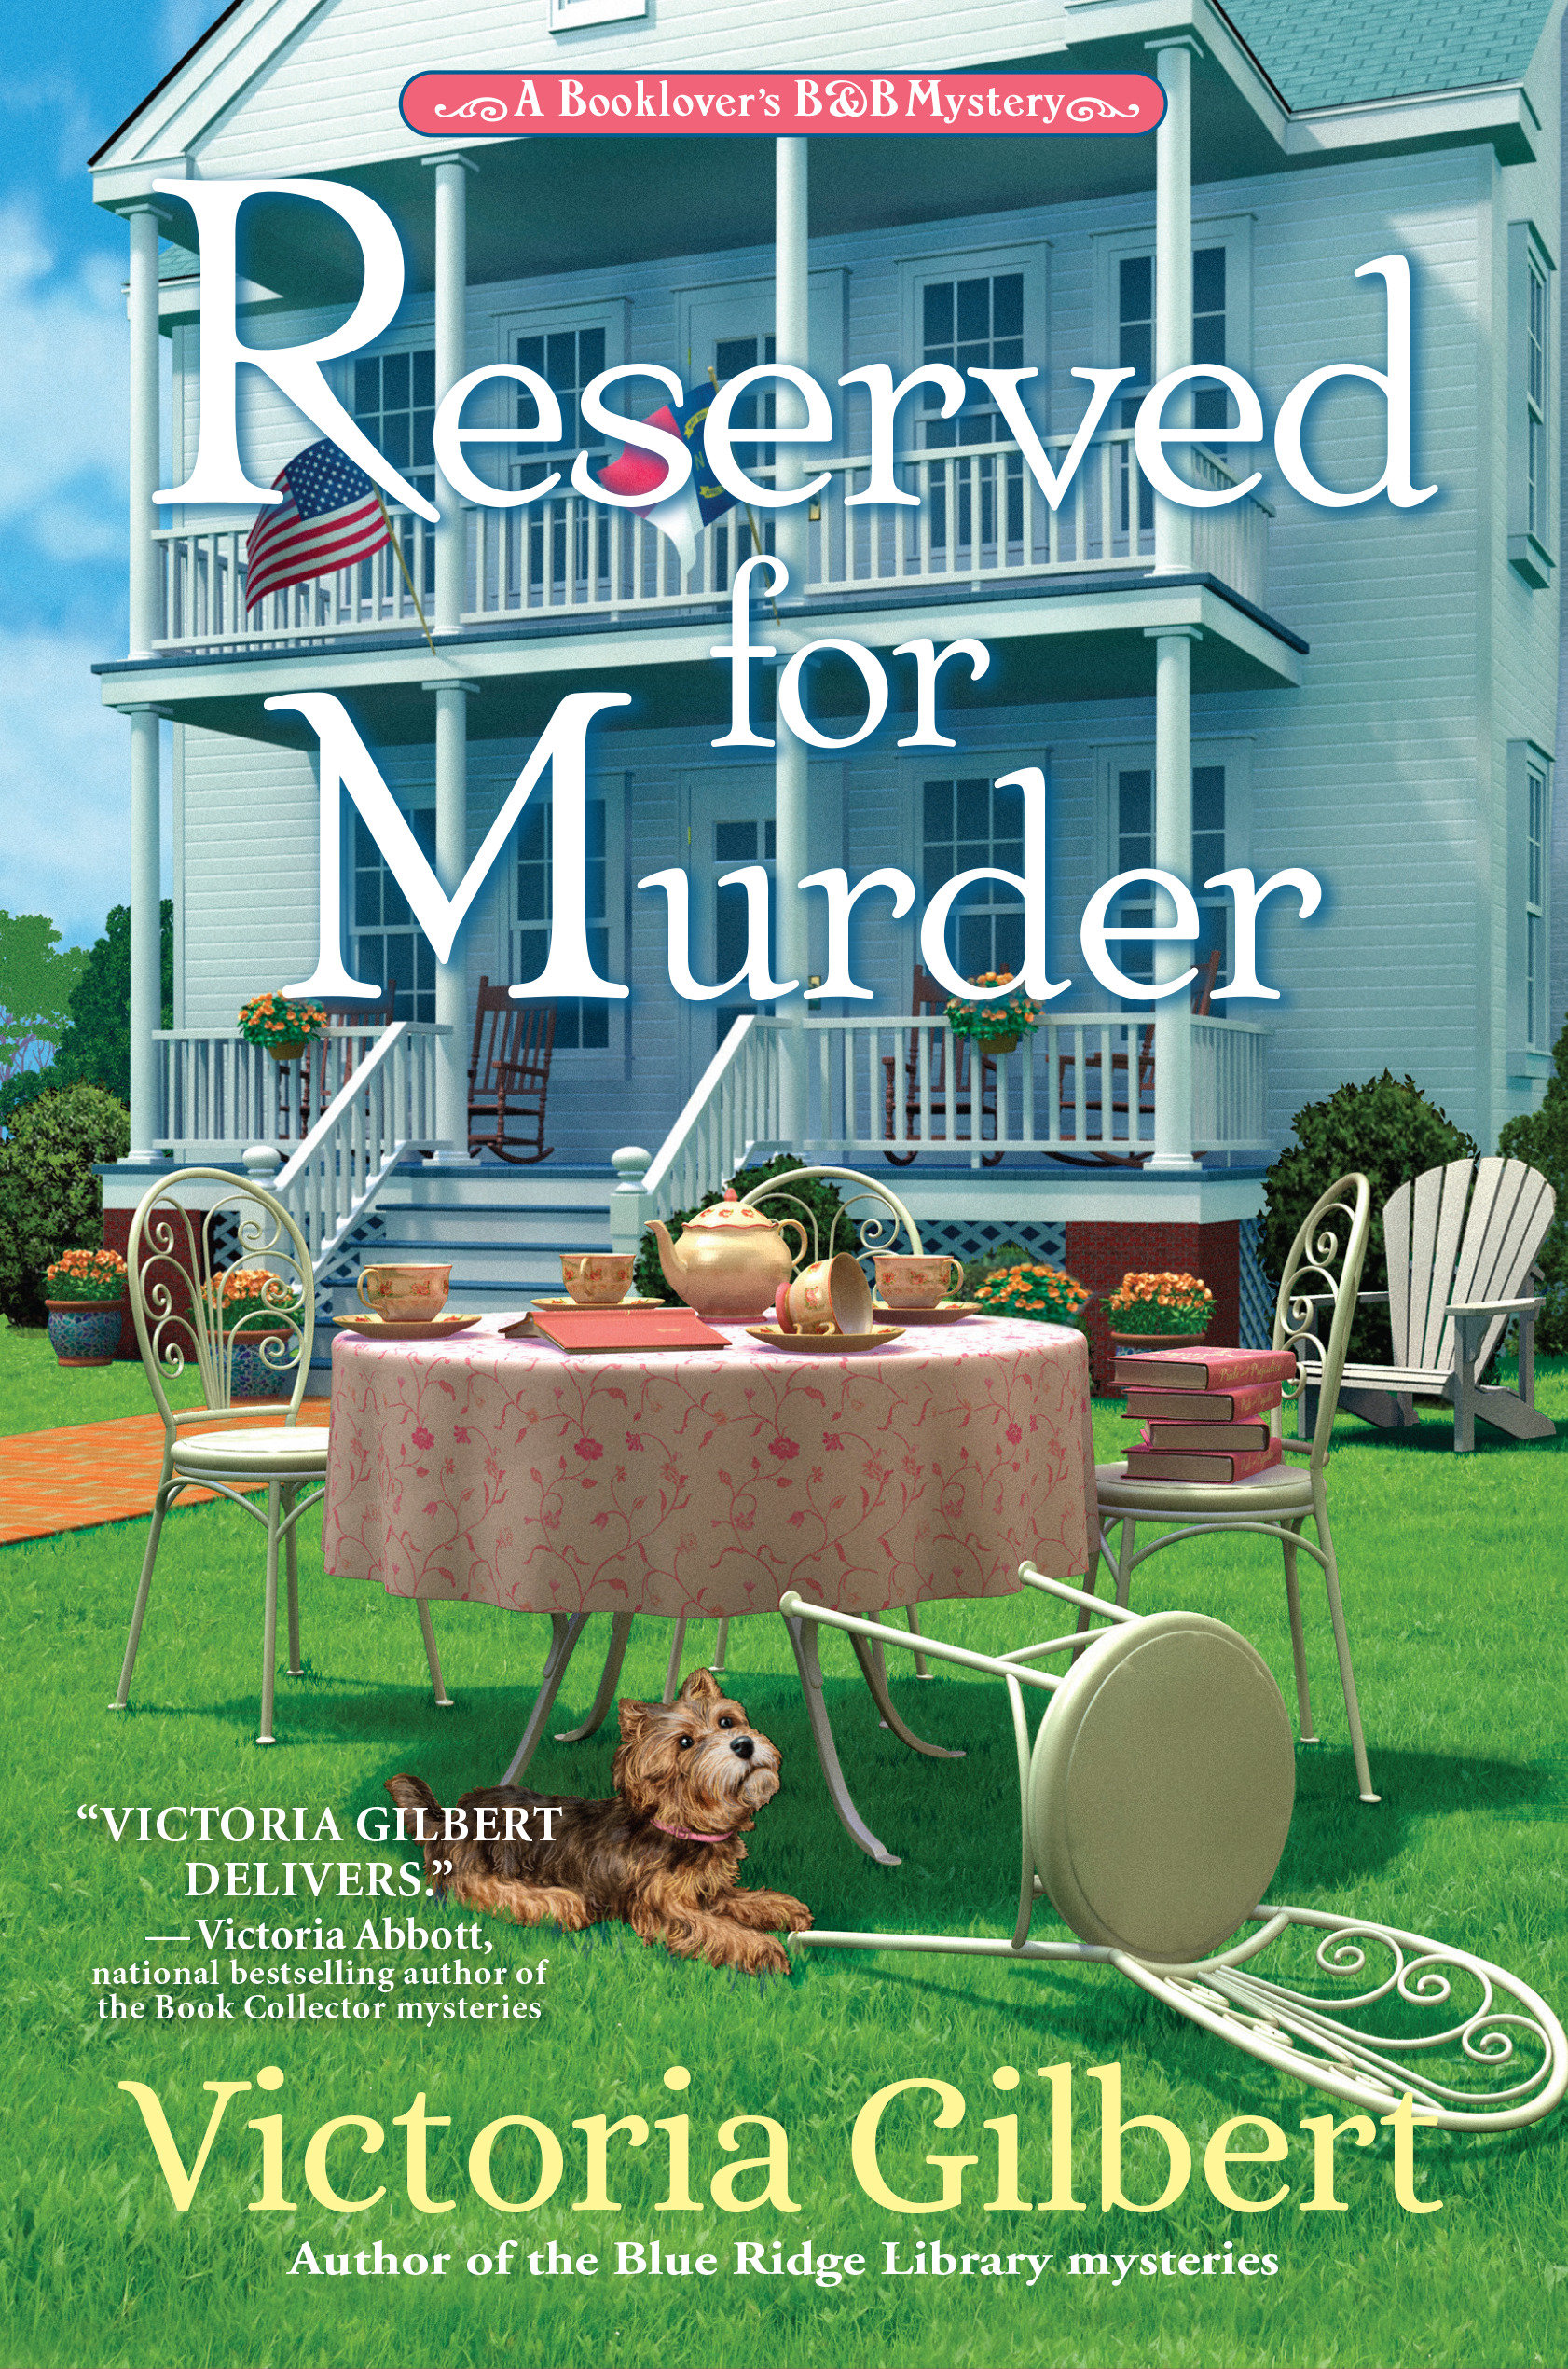 Reserved for Murder (Hardcover Book)